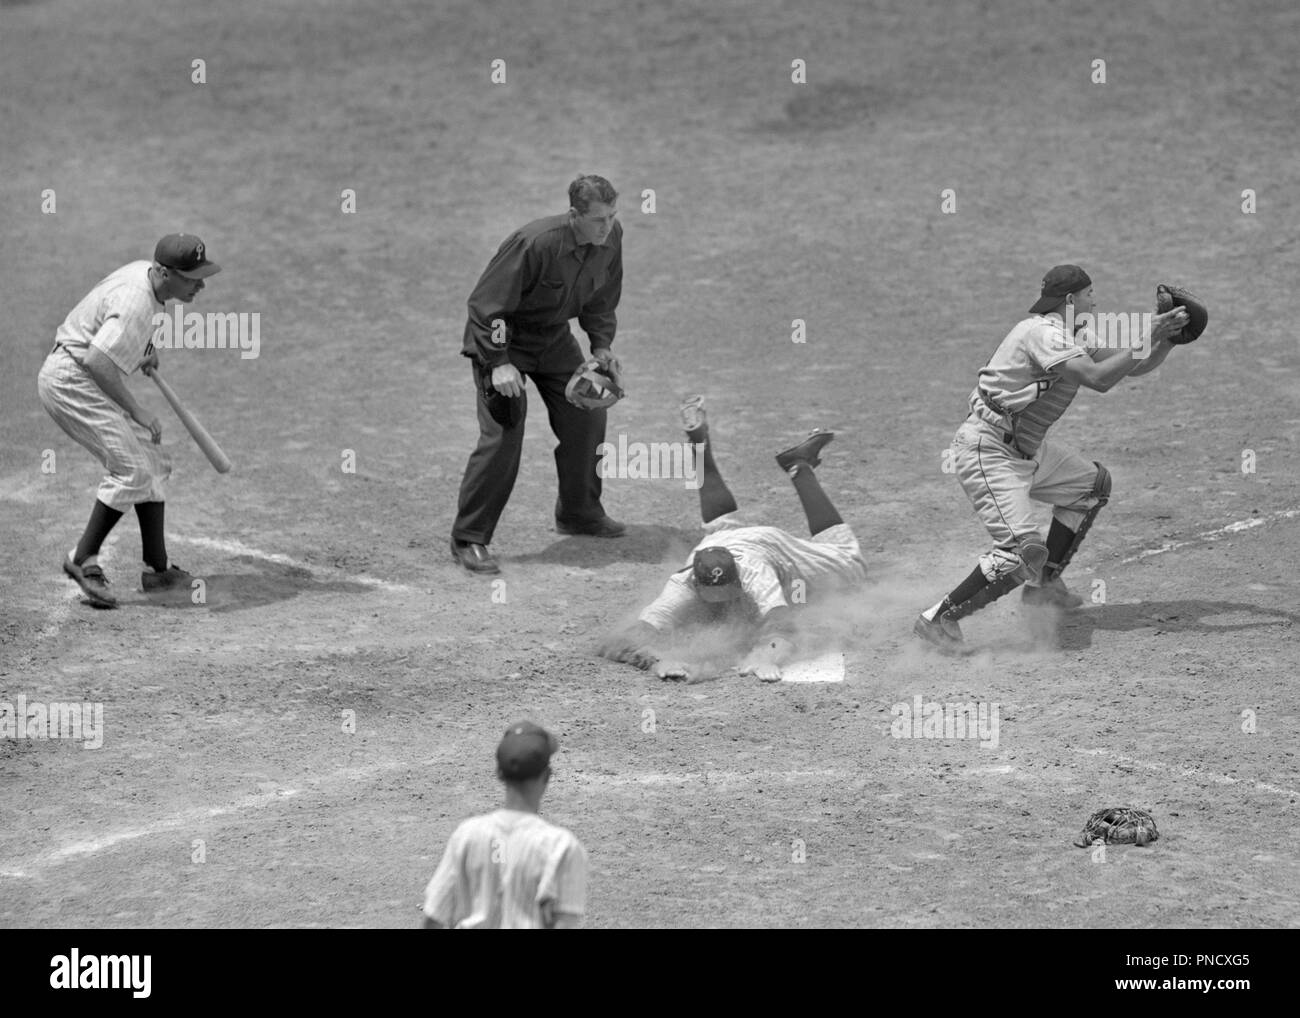 1950S 1960S baseball player safe at home plate cacther in front of plate umpire looking on next batter on deck - b11026 HAR001 HARS FULL-LENGTH PERSONS INSPIRATION MALES RISK NEXT B&W BATTER HIGH ANGLE UMPIRE CATCHER HOME PLATE AT IN OF ON OCCUPATIONS PROFESSIONAL SPORTS CONNECTION MOTION BLUR BALL GAME BALL SPORT MID-ADULT MID-ADULT MAN PHILLIES YOUNG ADULT MAN BASEBALL BAT BLACK AND WHITE CAUCASIAN ETHNICITY HAR001 OLD FASHIONED Stock Photo